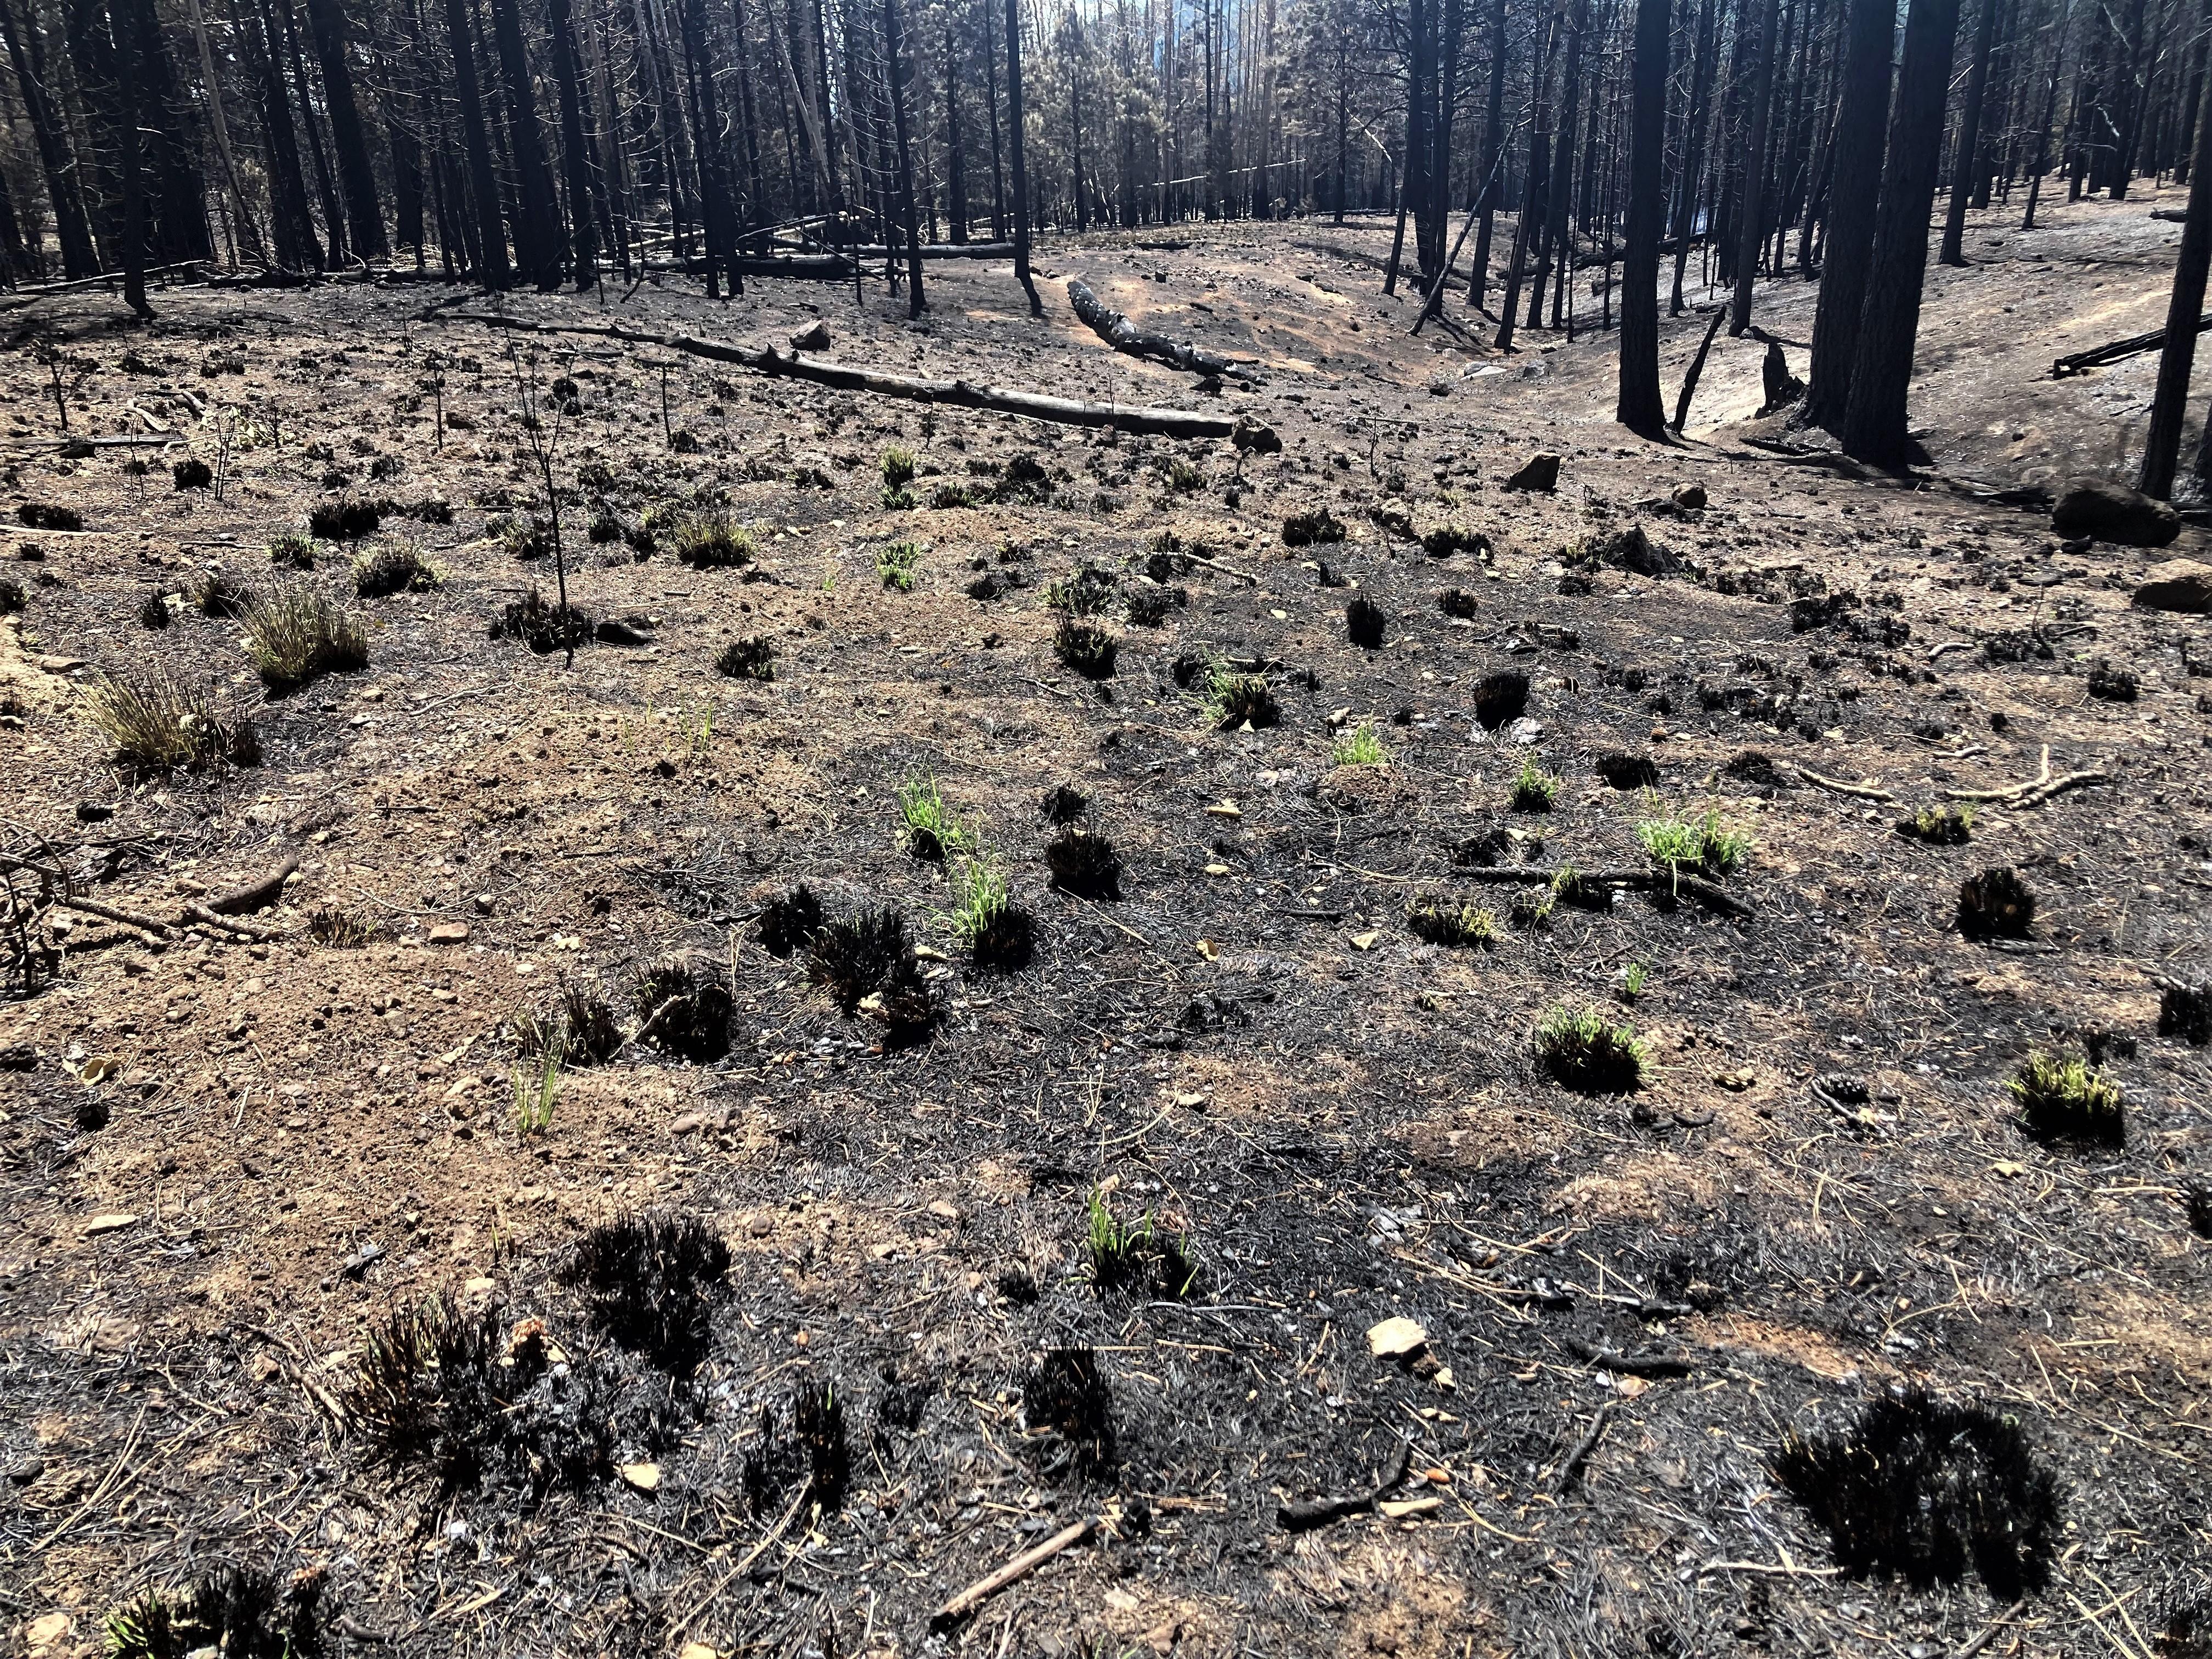 Fire adapted native grasses resprouts 12 days after the Pipeline Fire burned through the area adjacent to the Weatherford Trail on June 12, 2022. Photo taken June 24, 2022 by Dick Fleishman USFS